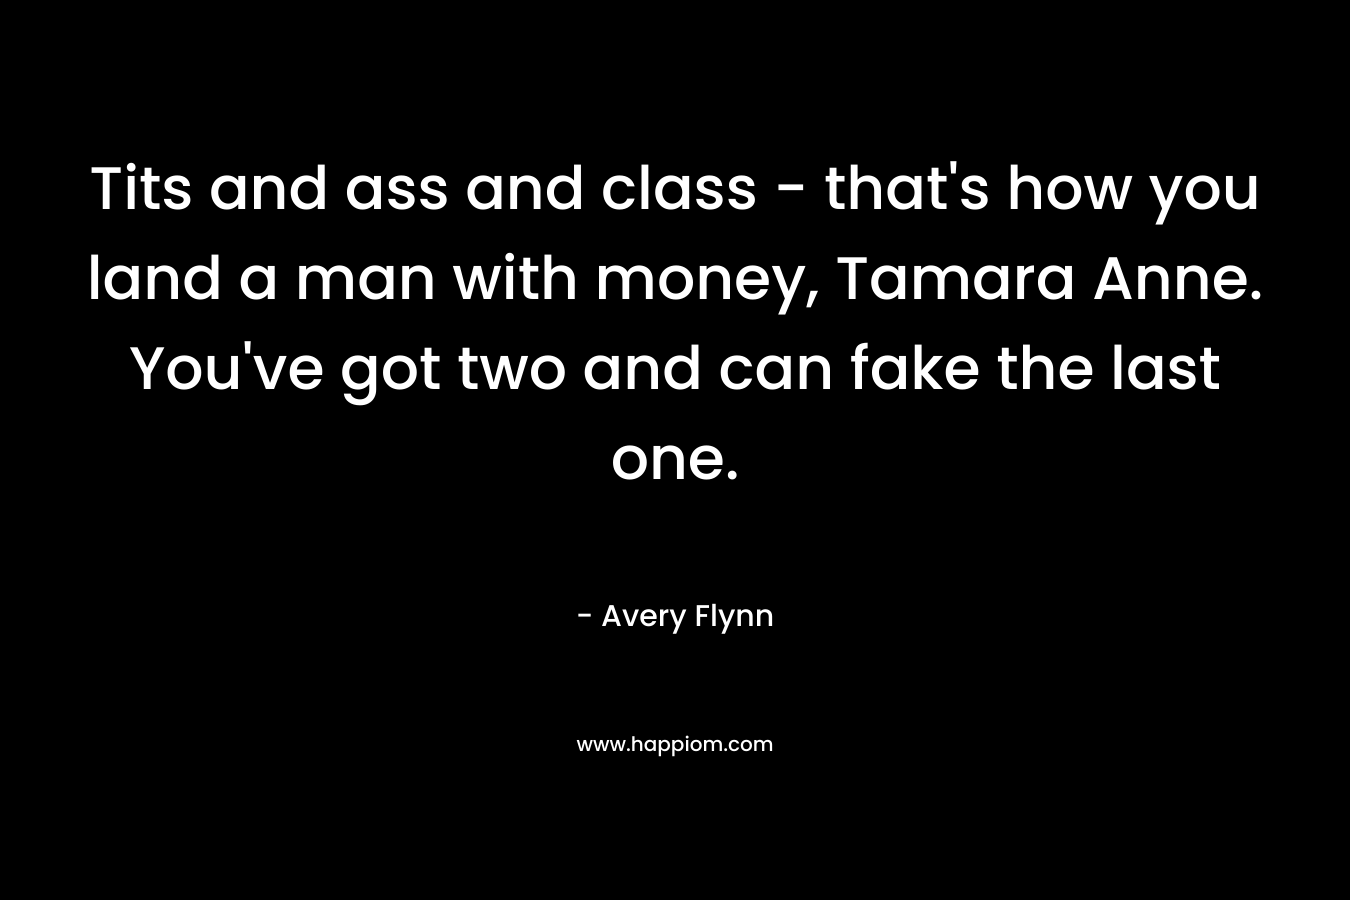 Tits and ass and class – that’s how you land a man with money, Tamara Anne. You’ve got two and can fake the last one. – Avery Flynn